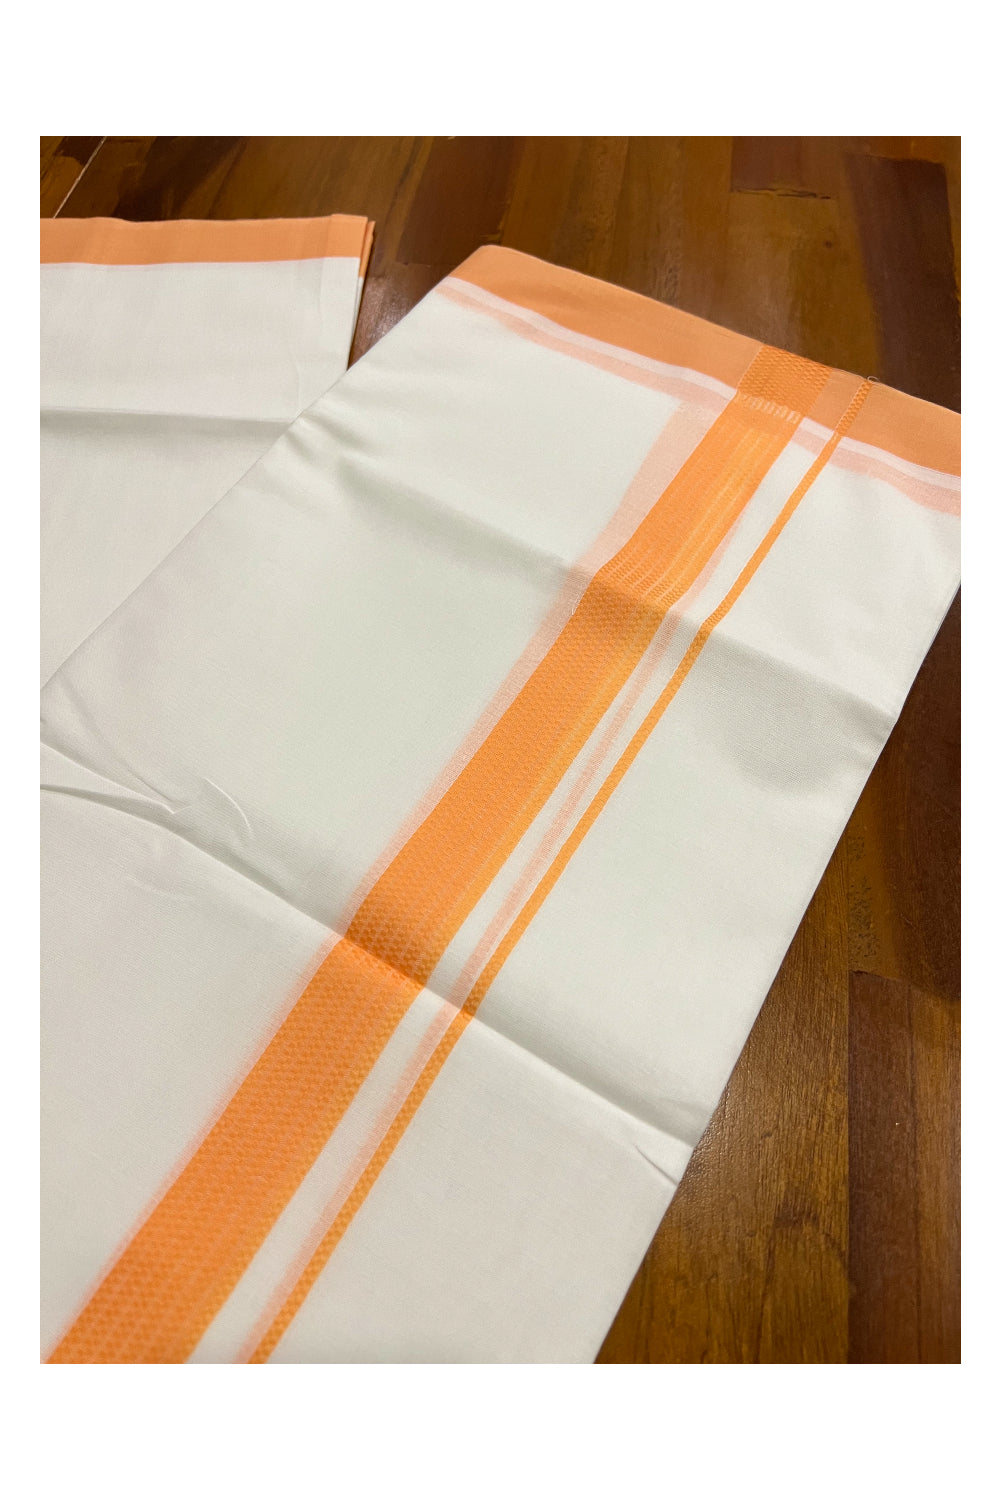 Pure White Cotton Double Mundu with Lines on Orange Border (South Indian Dhoti)